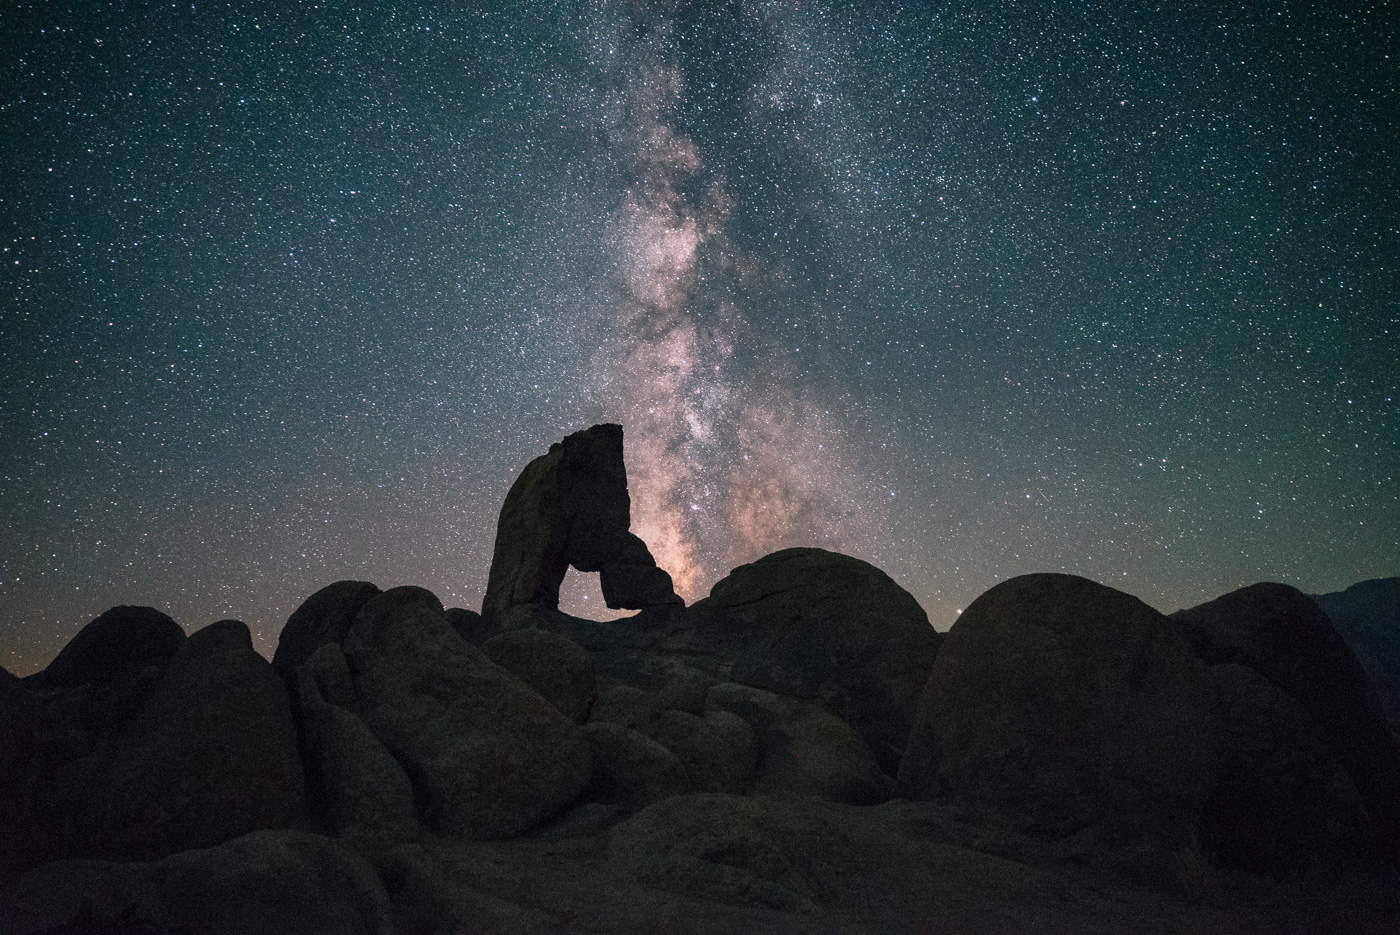 zeiss batis milky way astrophotography - lade boot arch, sony a7s